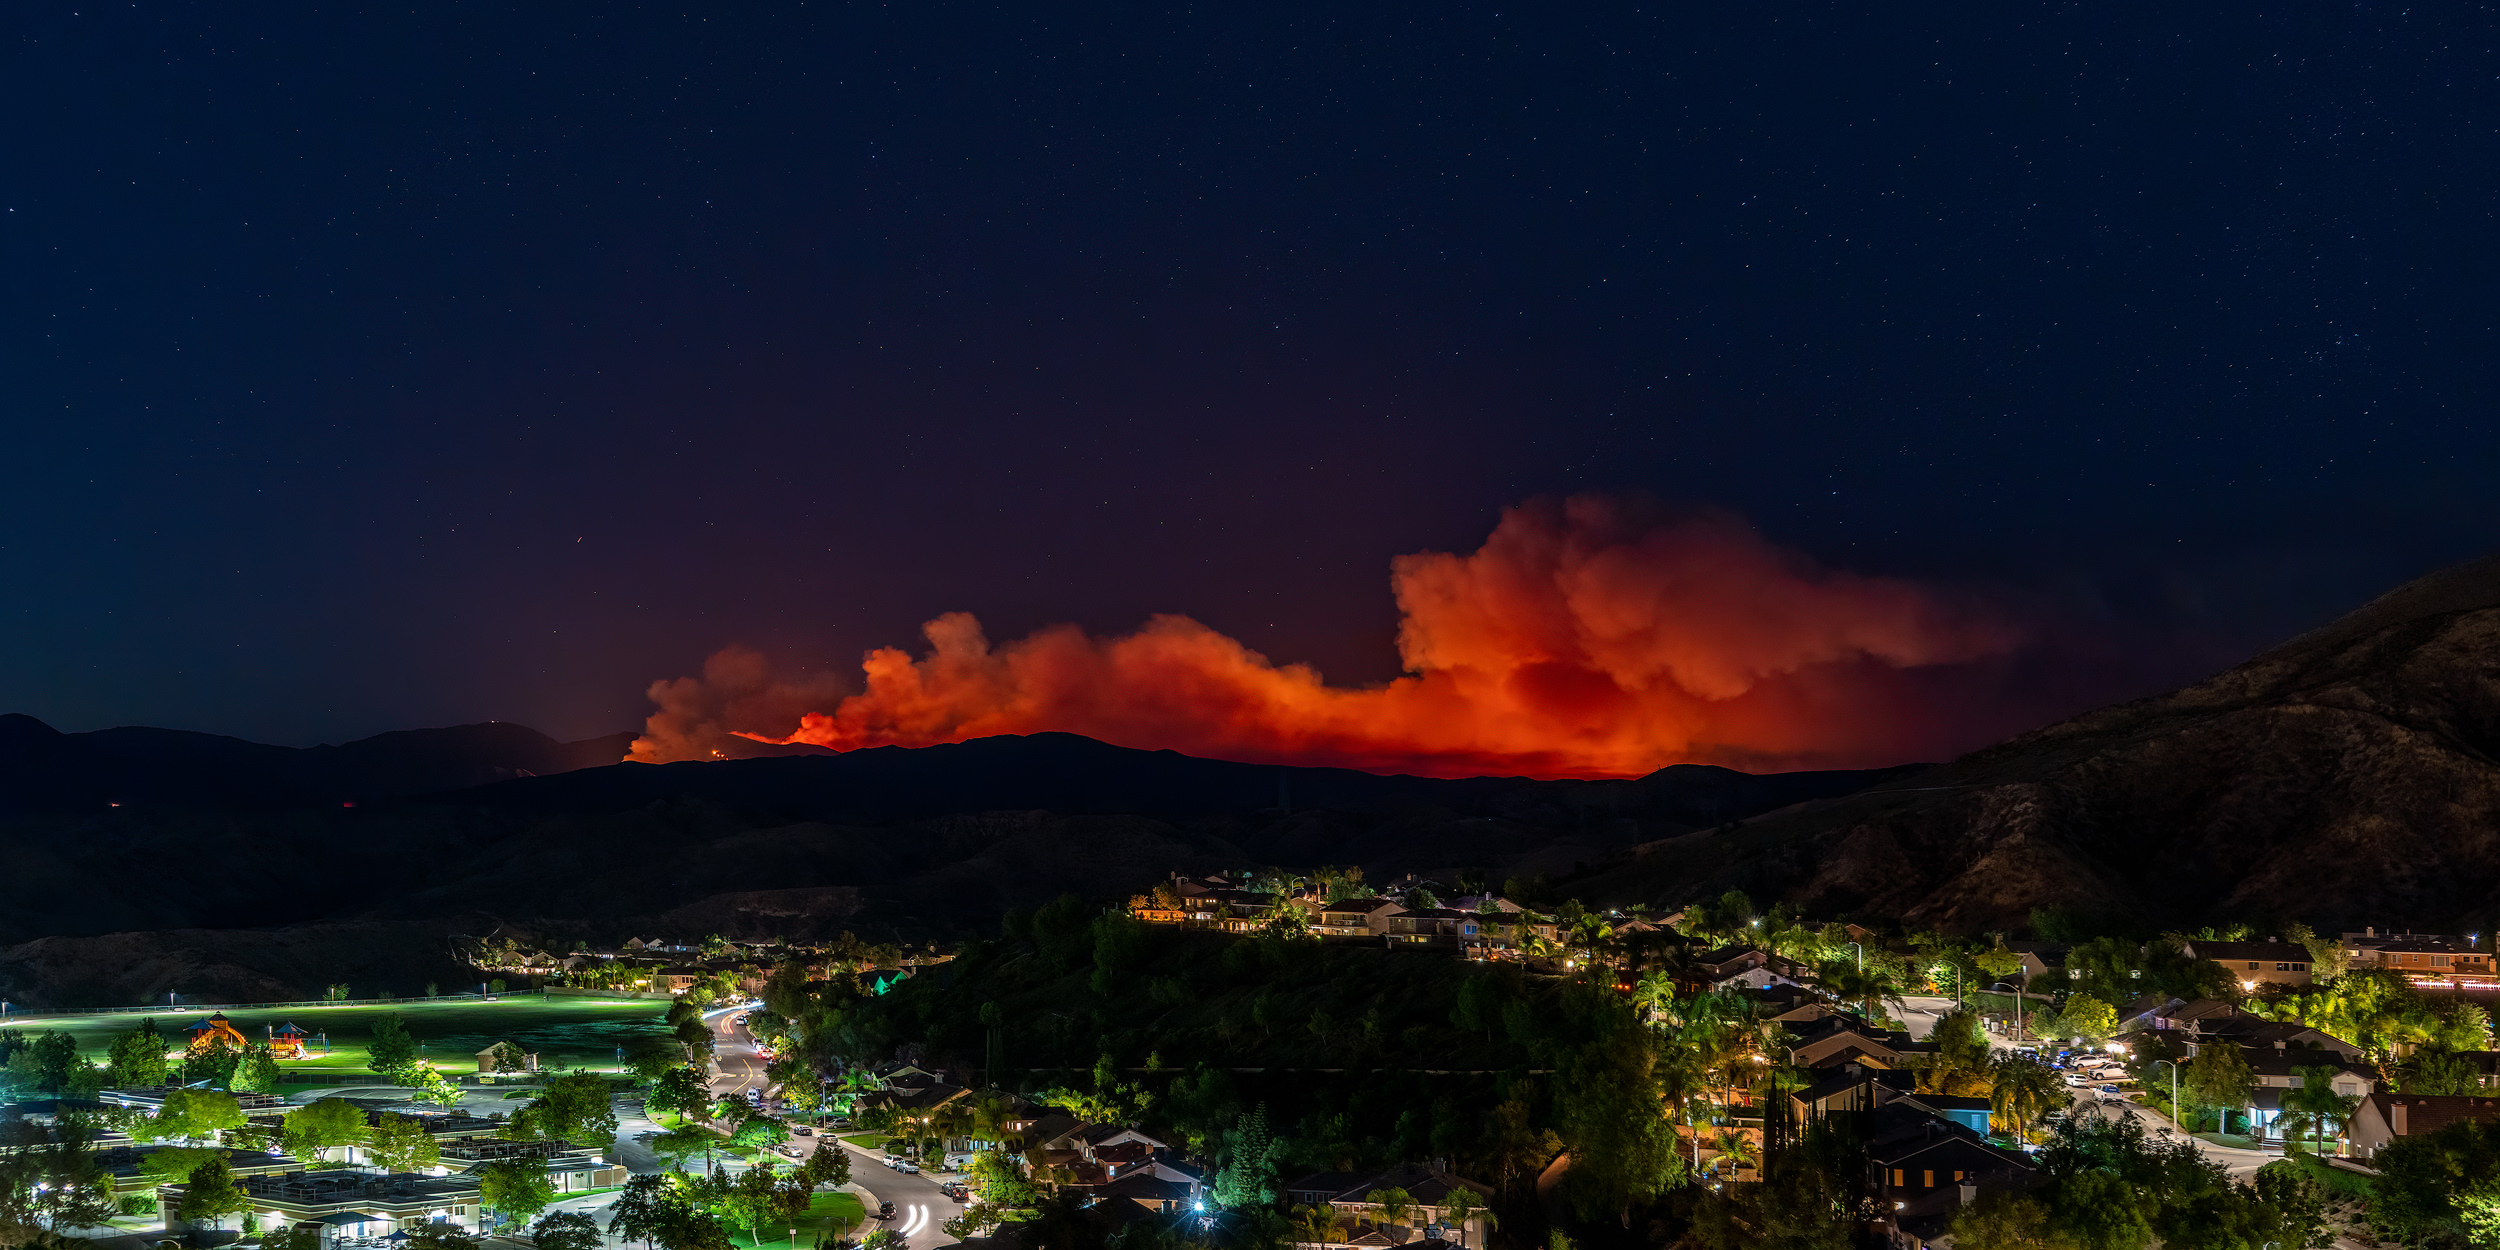 The #lakefire at night